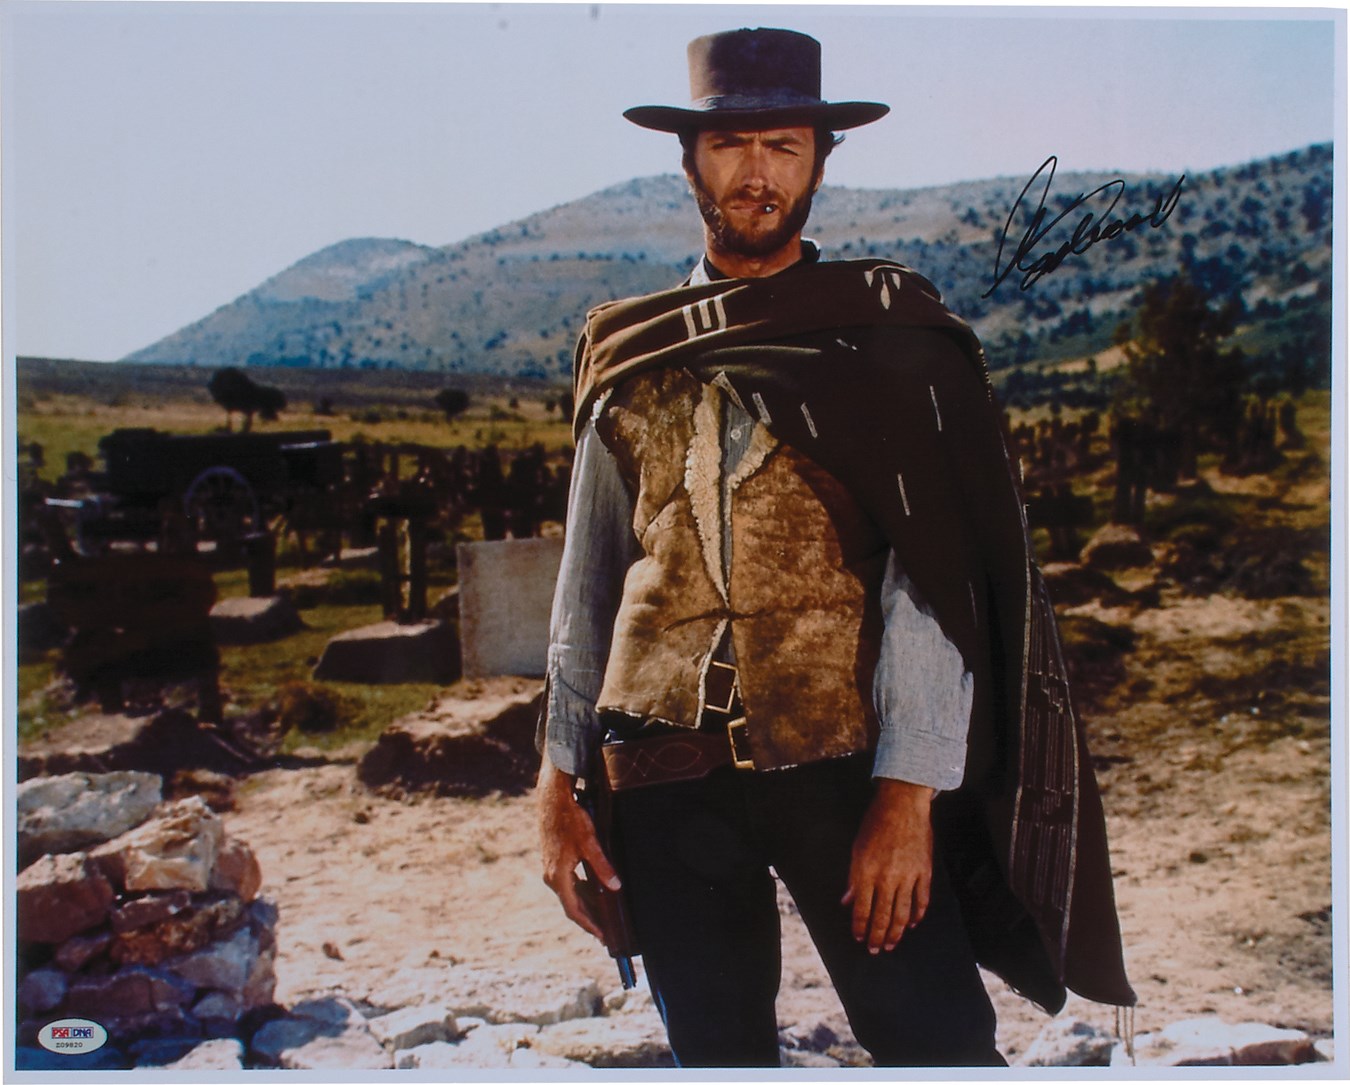 - Clint Eastwood 16x20" "The Good, The Bad and The Ugly" Signed Photograph (PSA/DNA)